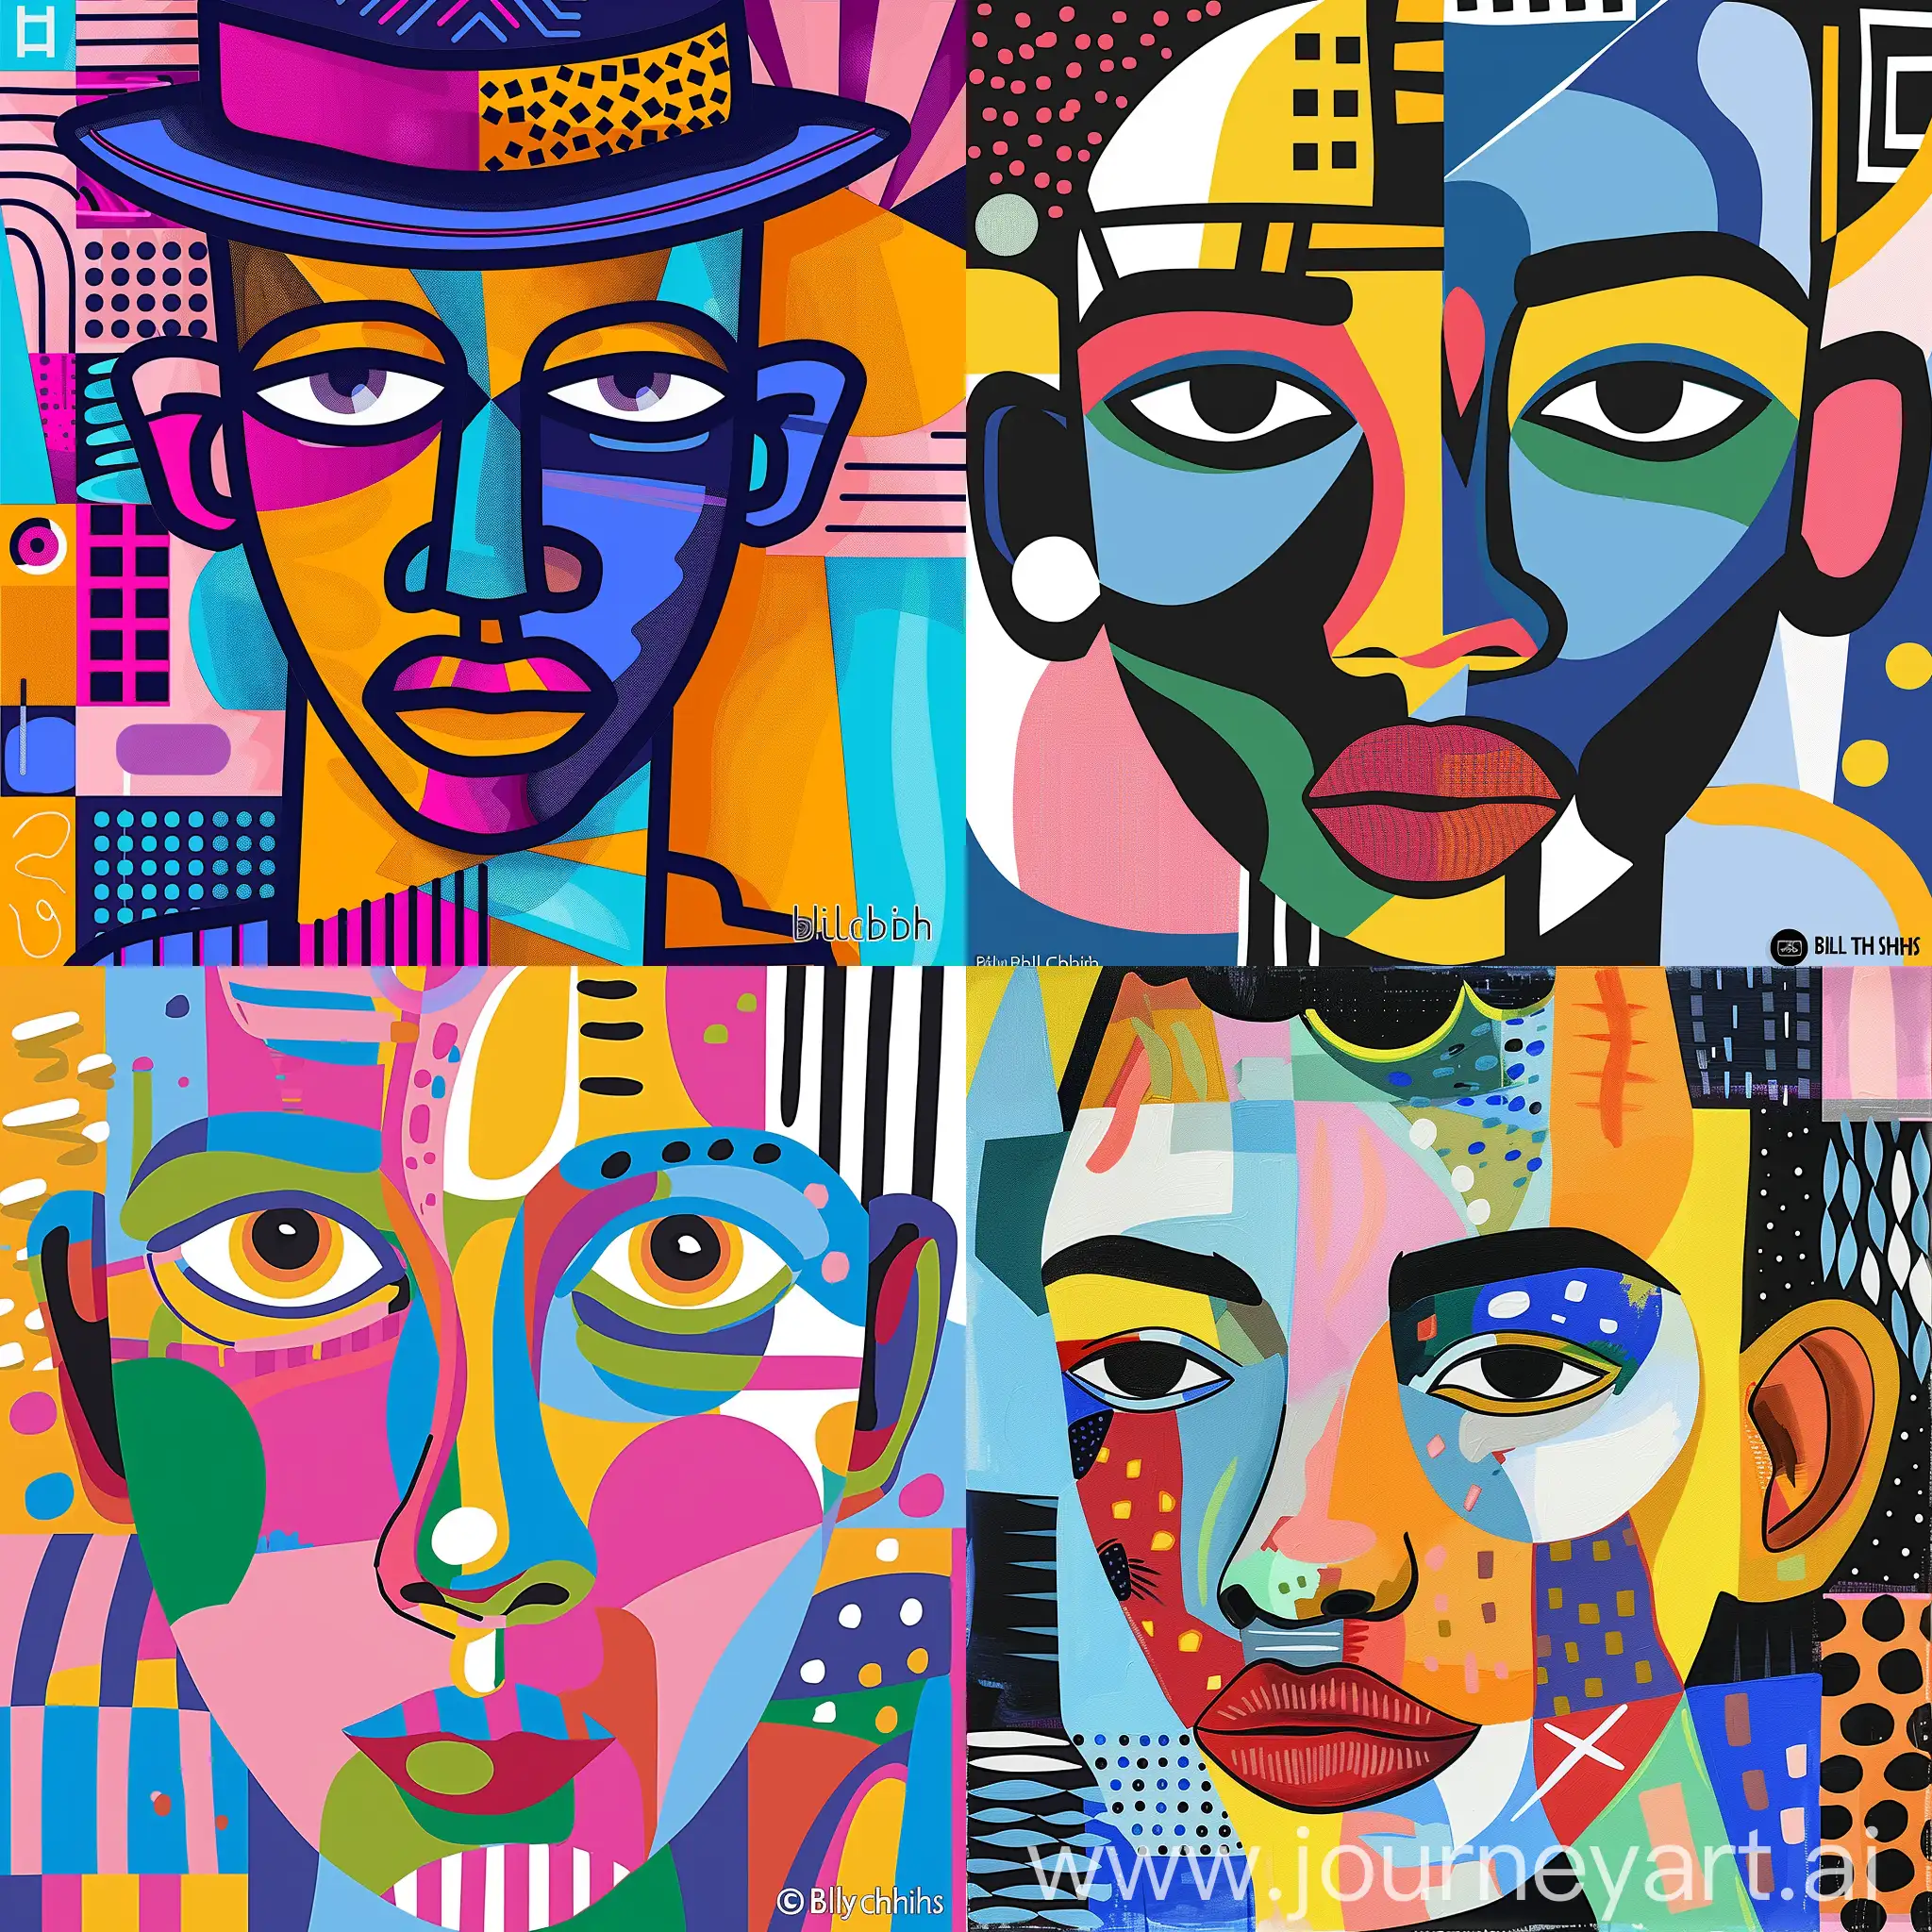 Contemporary Vibrant Memphis Style Abstract Portrait in Vector Art by Billy Childish